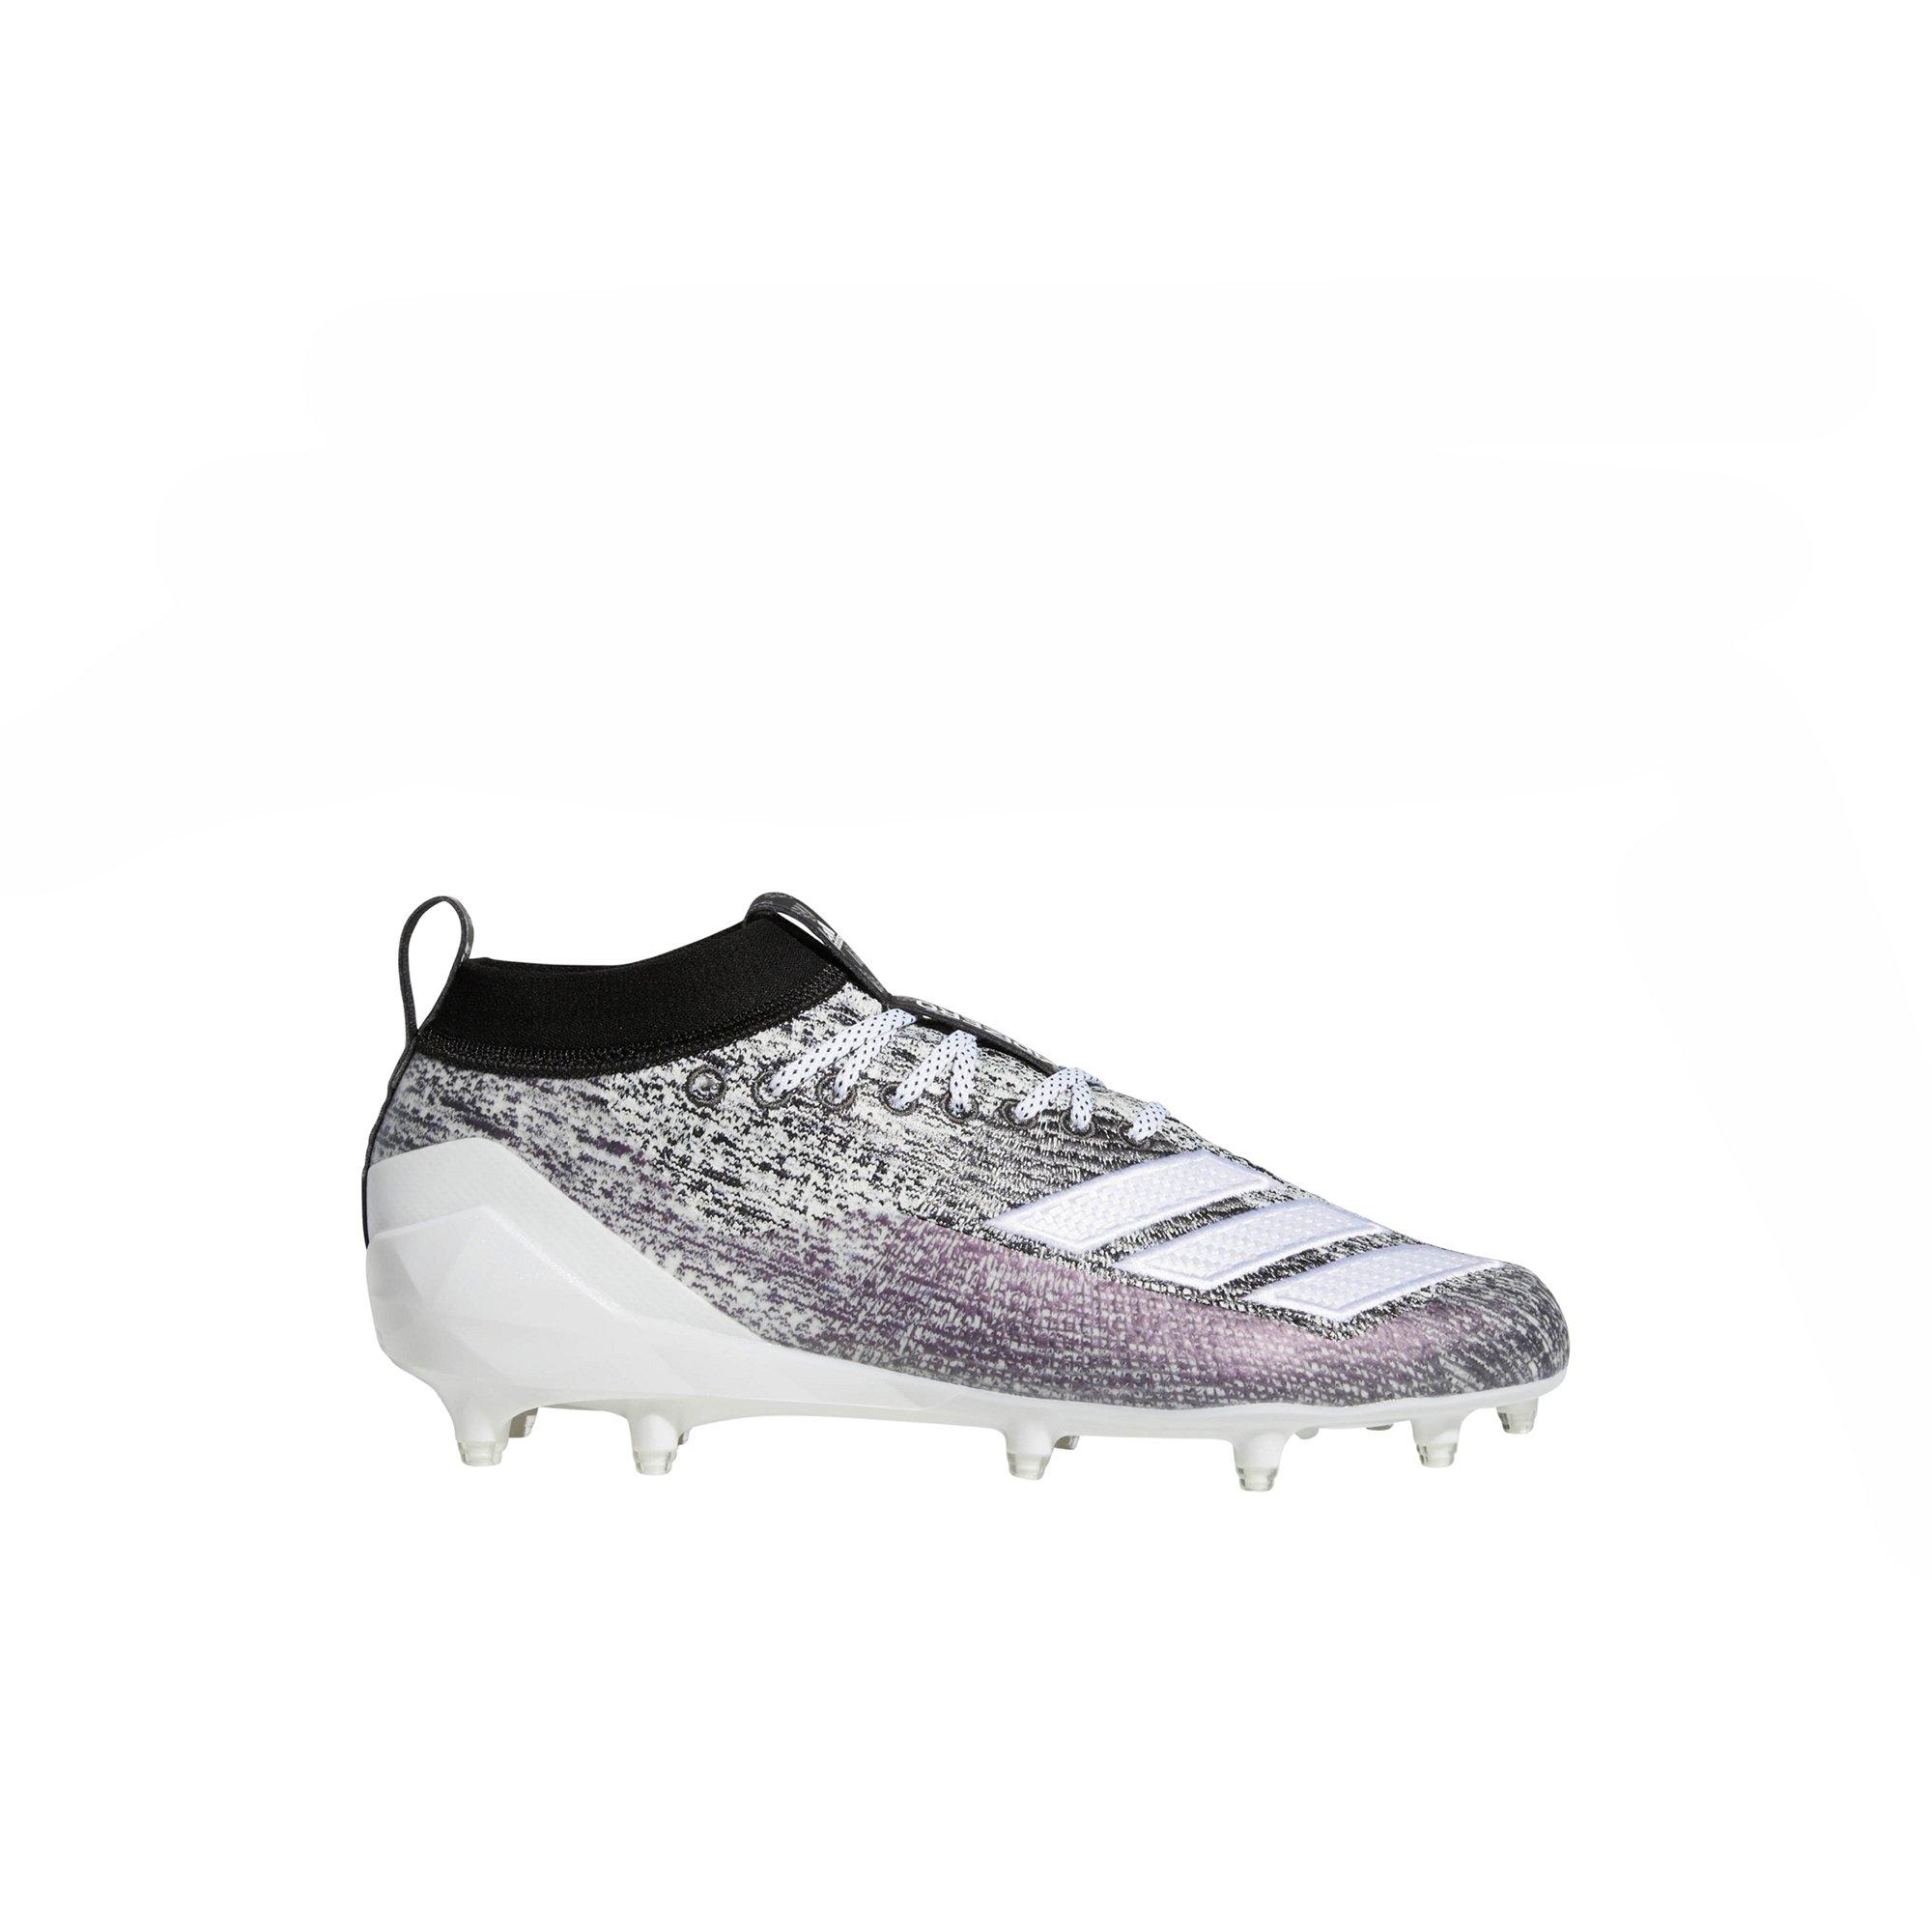 adidas football cleats black and white